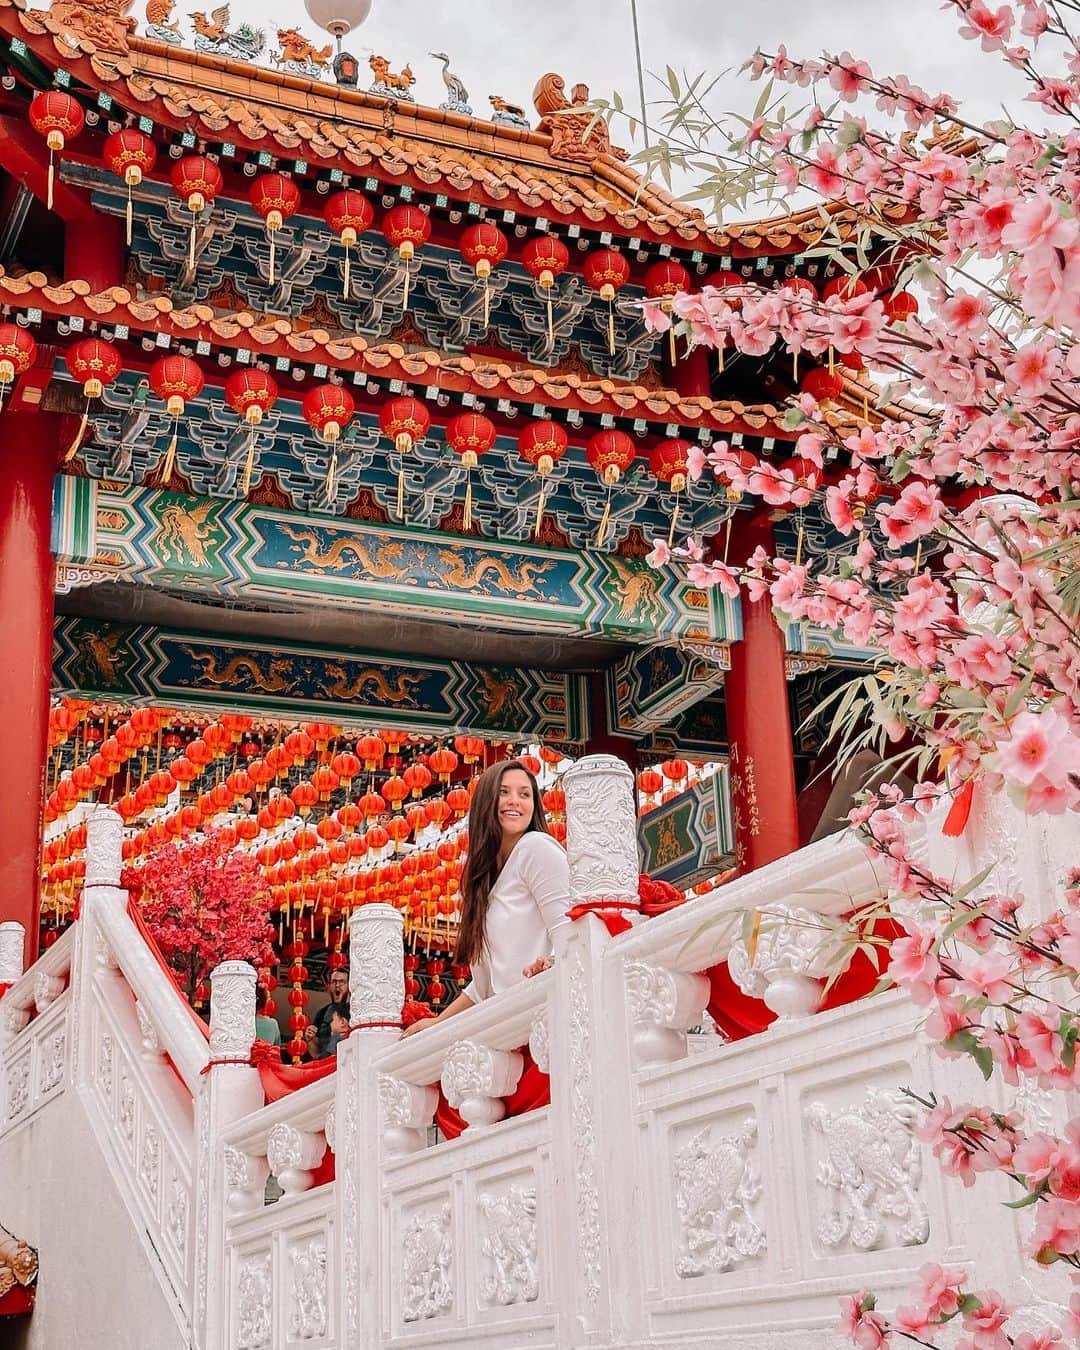 Things to do in KL - Thean Hou Temple